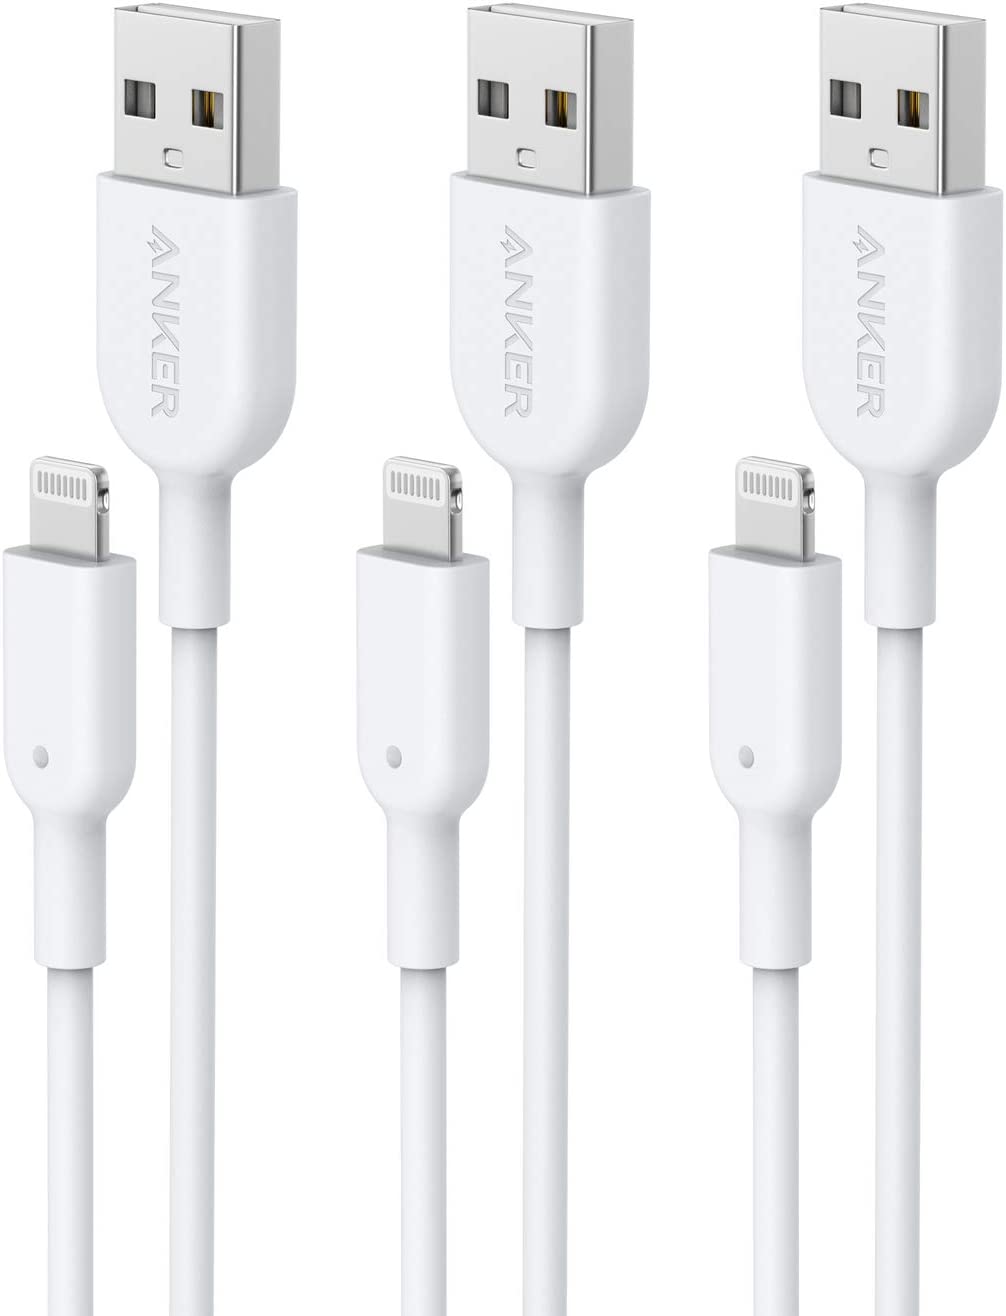 Anker Male-To-Male iPhone Charger Cords, 3-Pack